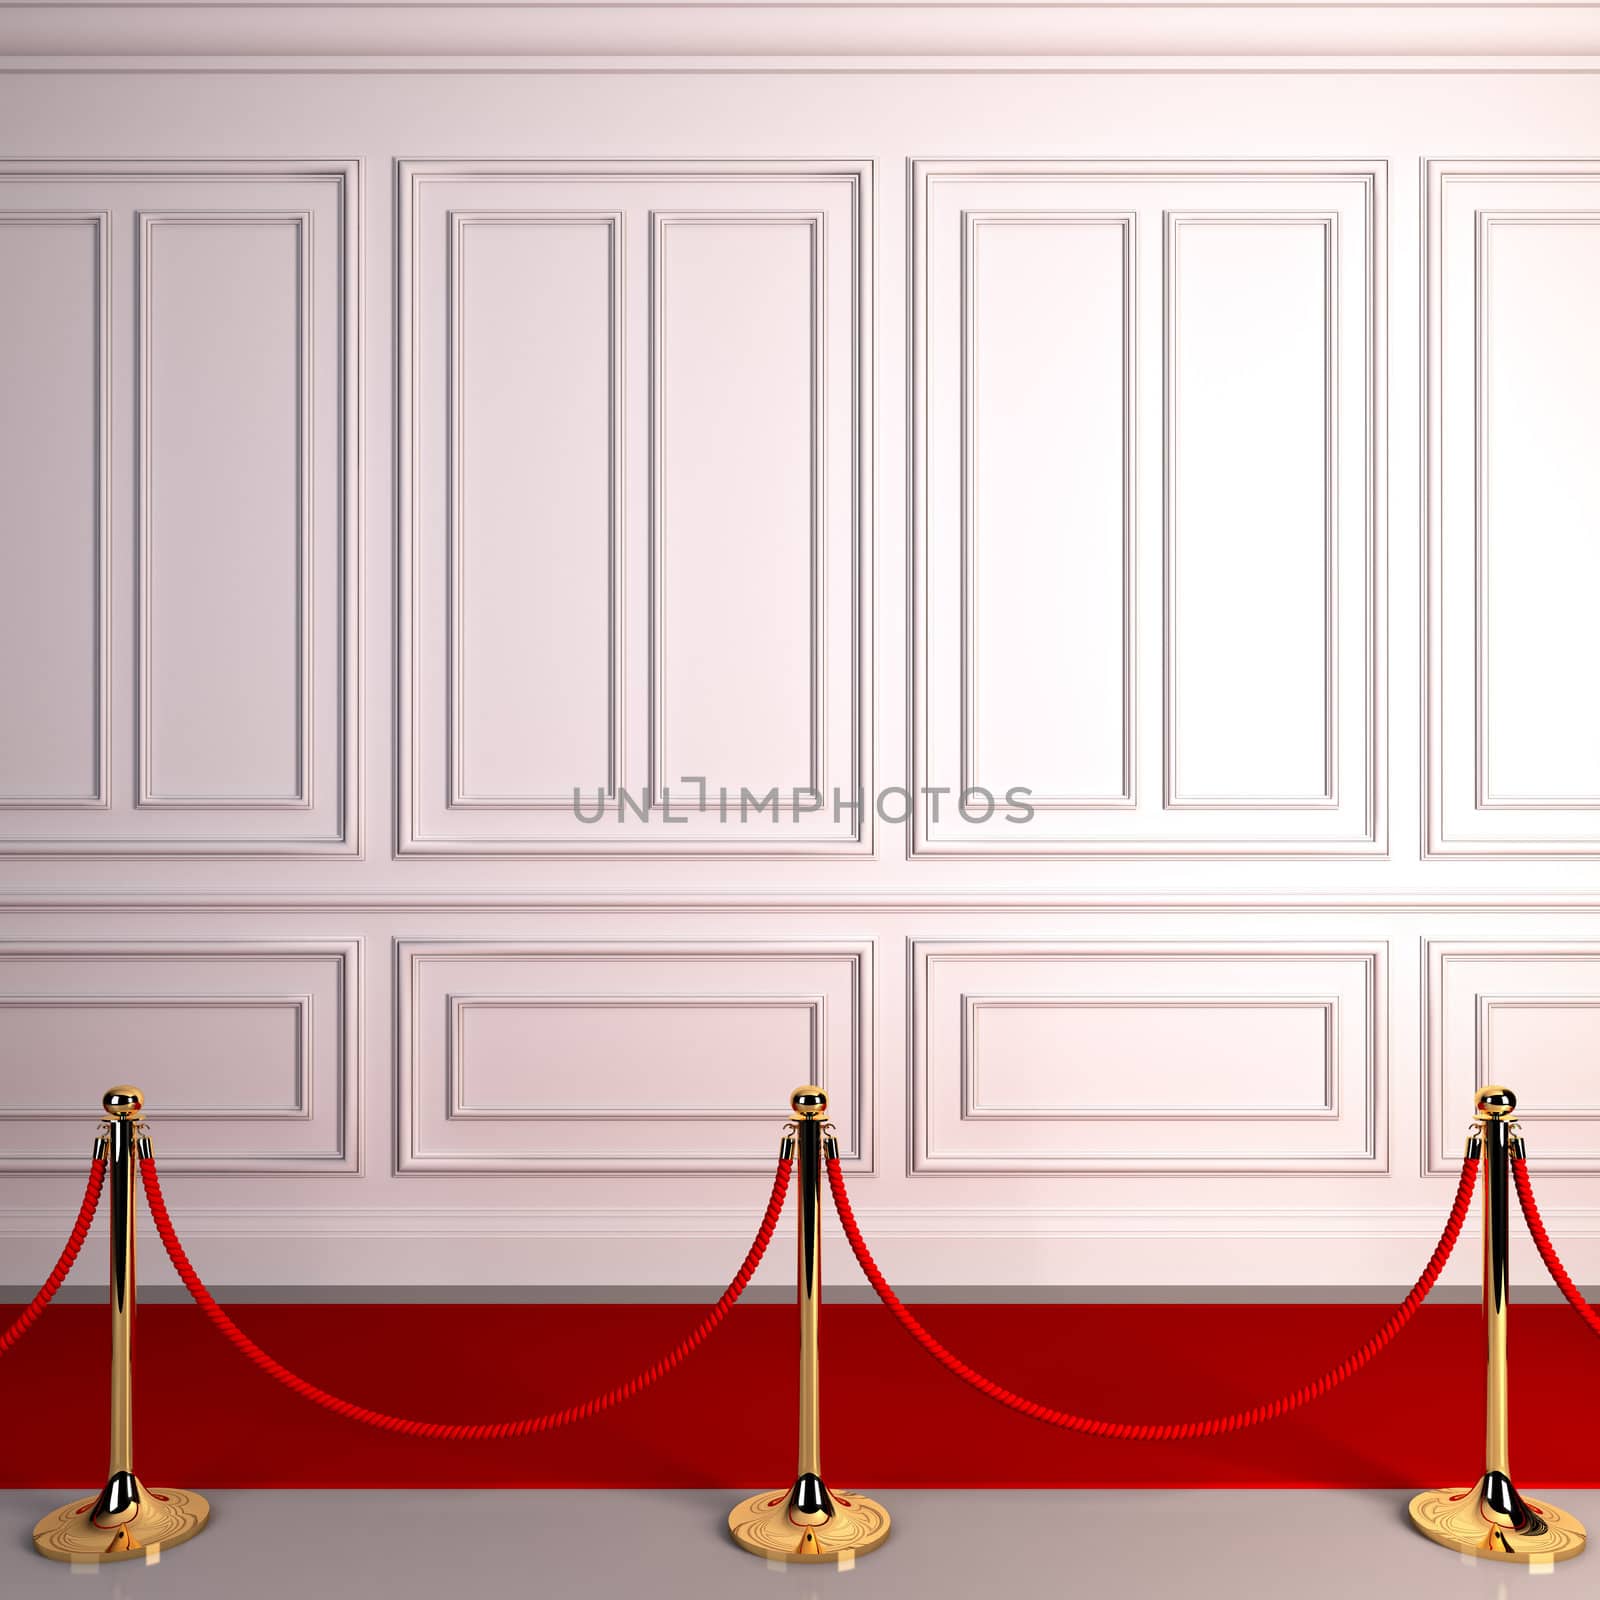 A 3d illustration of red carpet abstract awards.